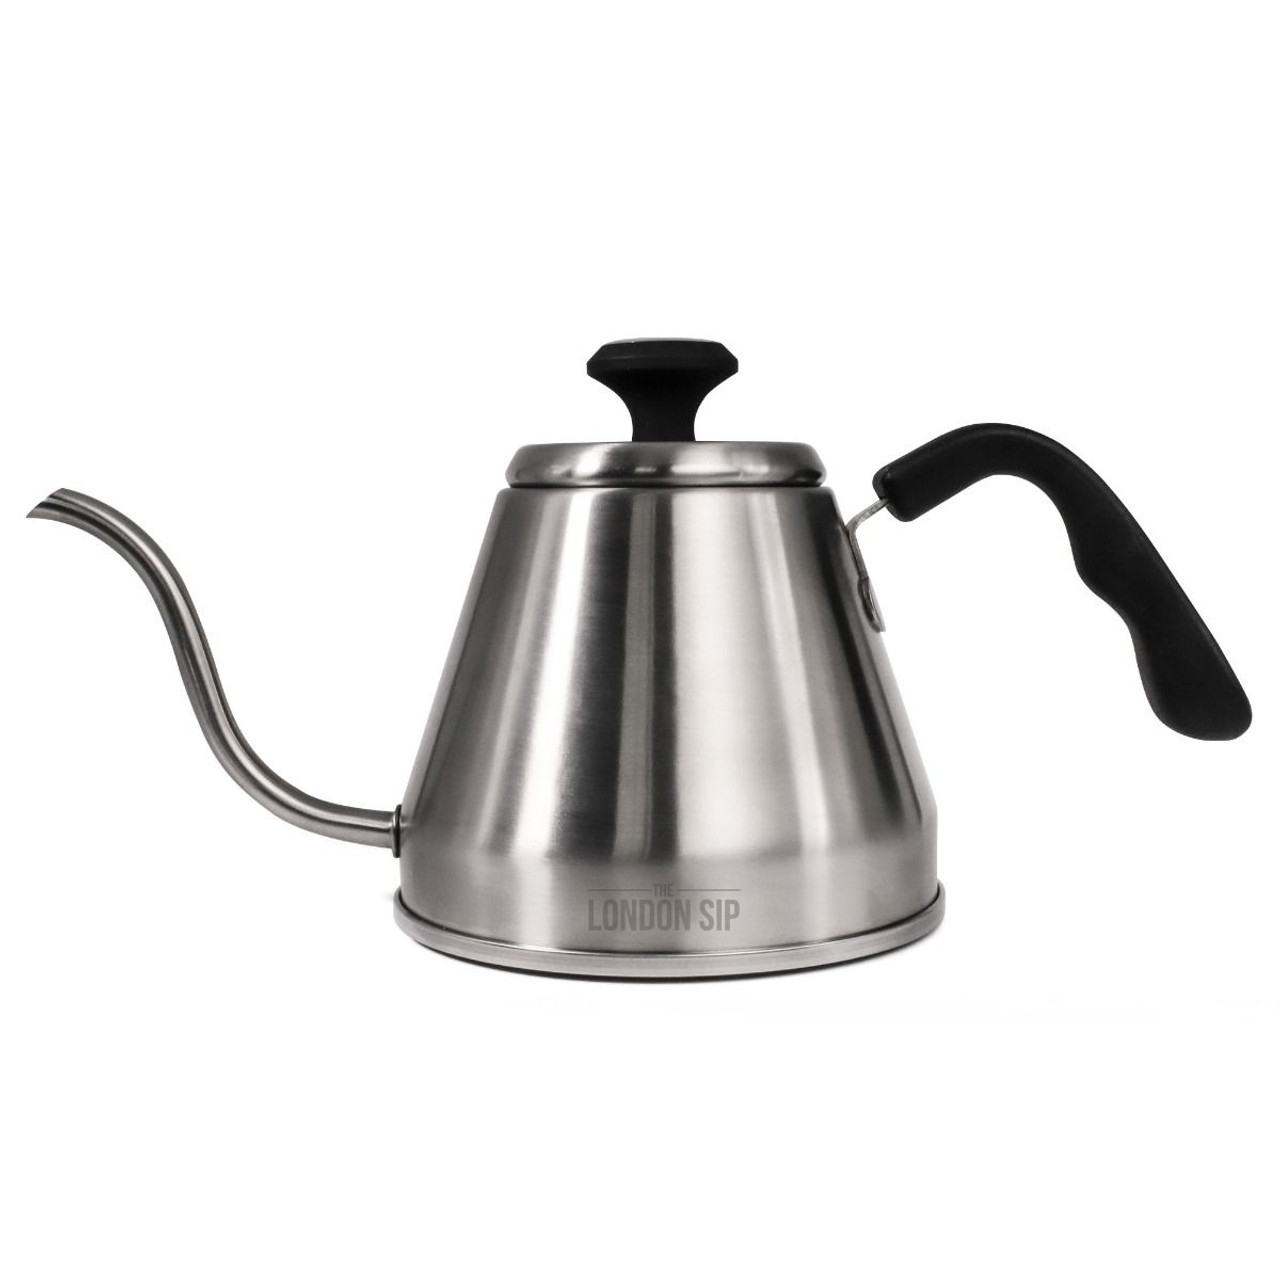 Electric 1.2 Liter Gooseneck Kettle with 1.2 liter capacity.